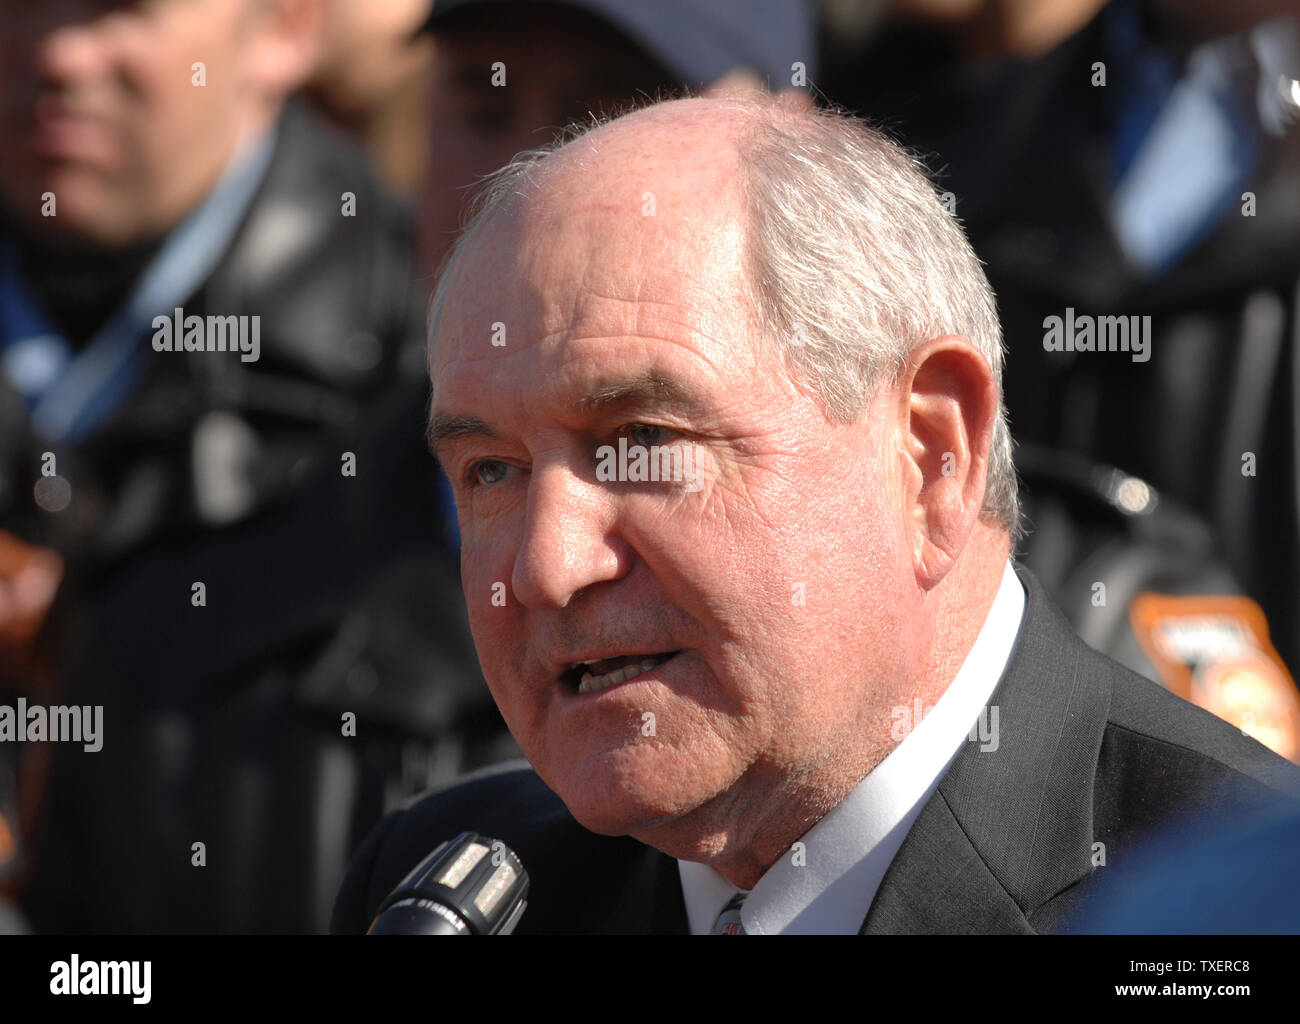 Georgia Governor Sonny Perdue speaks at a motorcycle safety rally at the Georgia State Capitol on February 6, 2007. The actors promoted a motorcycle safety program and their upcoming comedy film. (UPI Photo/John Dickerson) Stock Photo